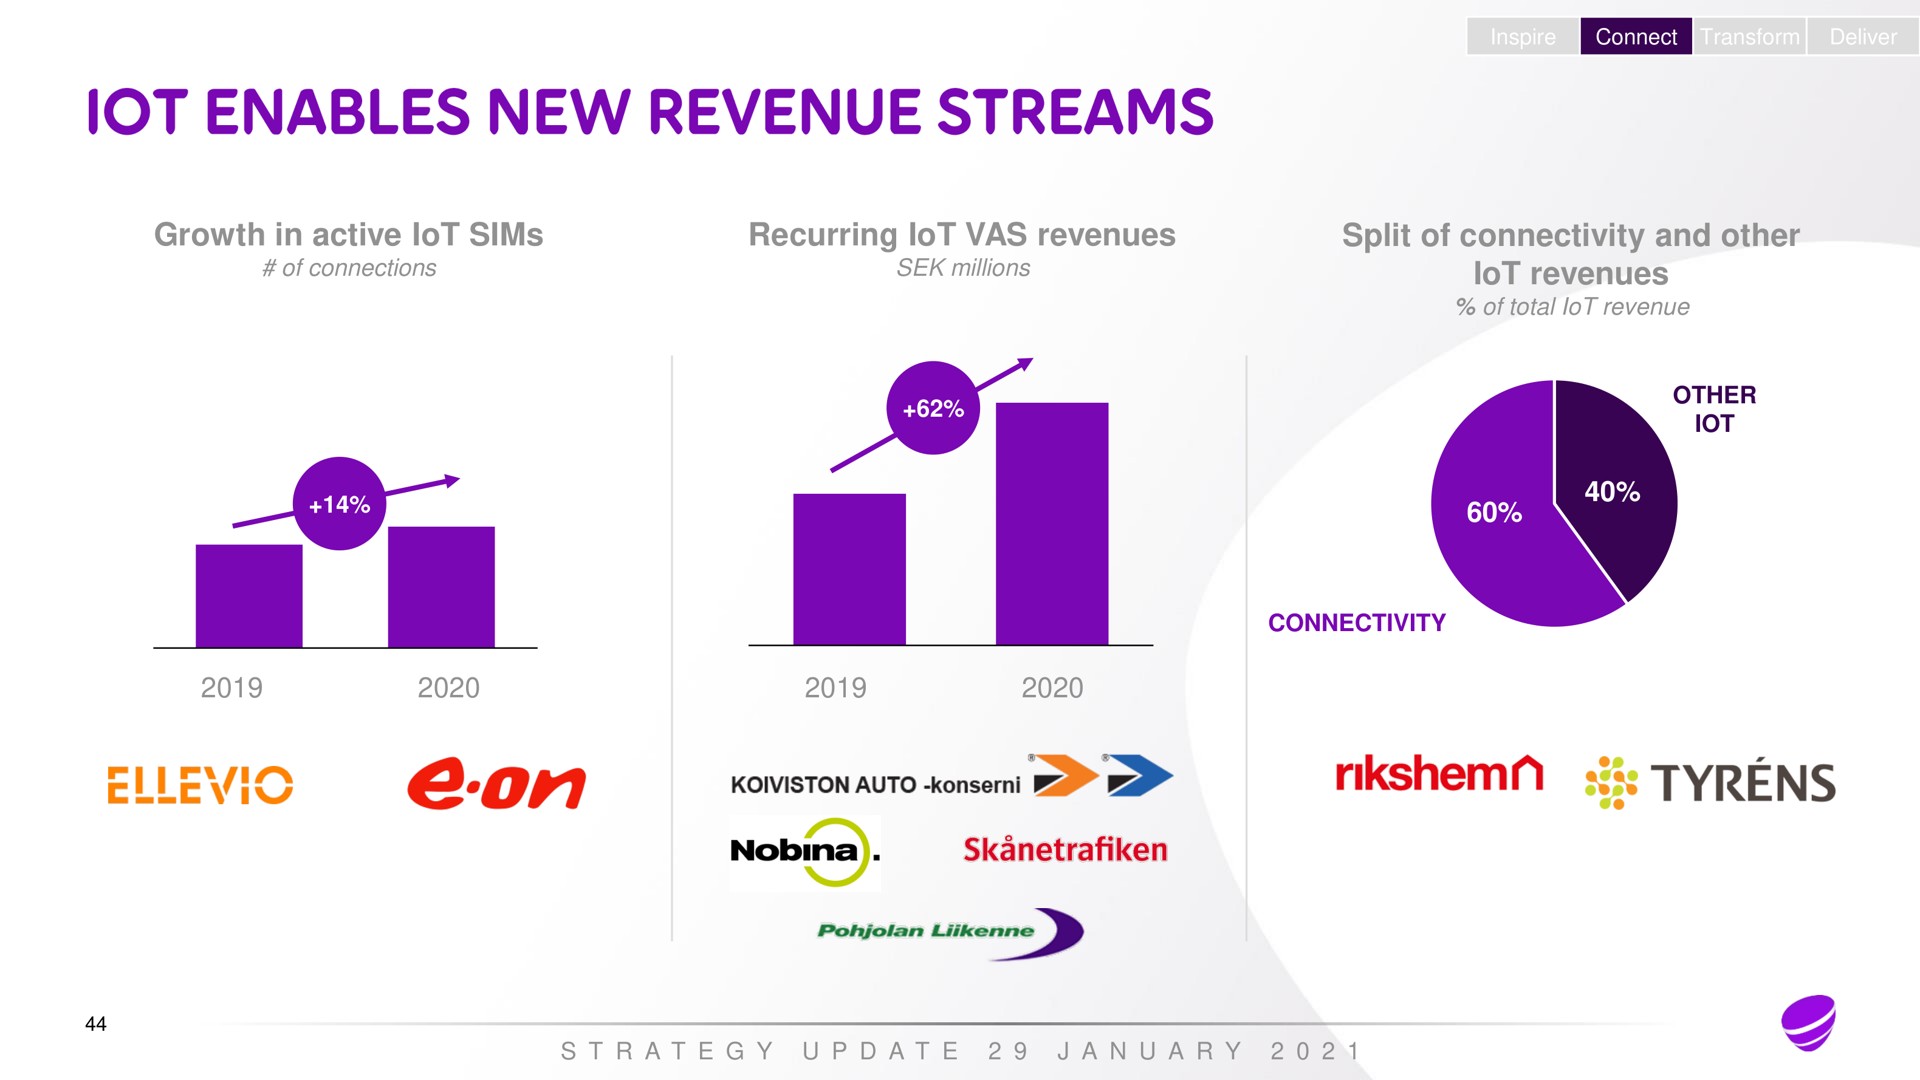 growth in active of connections recurring vas revenues millions inspire connect transform deliver split of connectivity and other revenues of total revenue other connectivity a a a a lot enables new streams | Telia Company